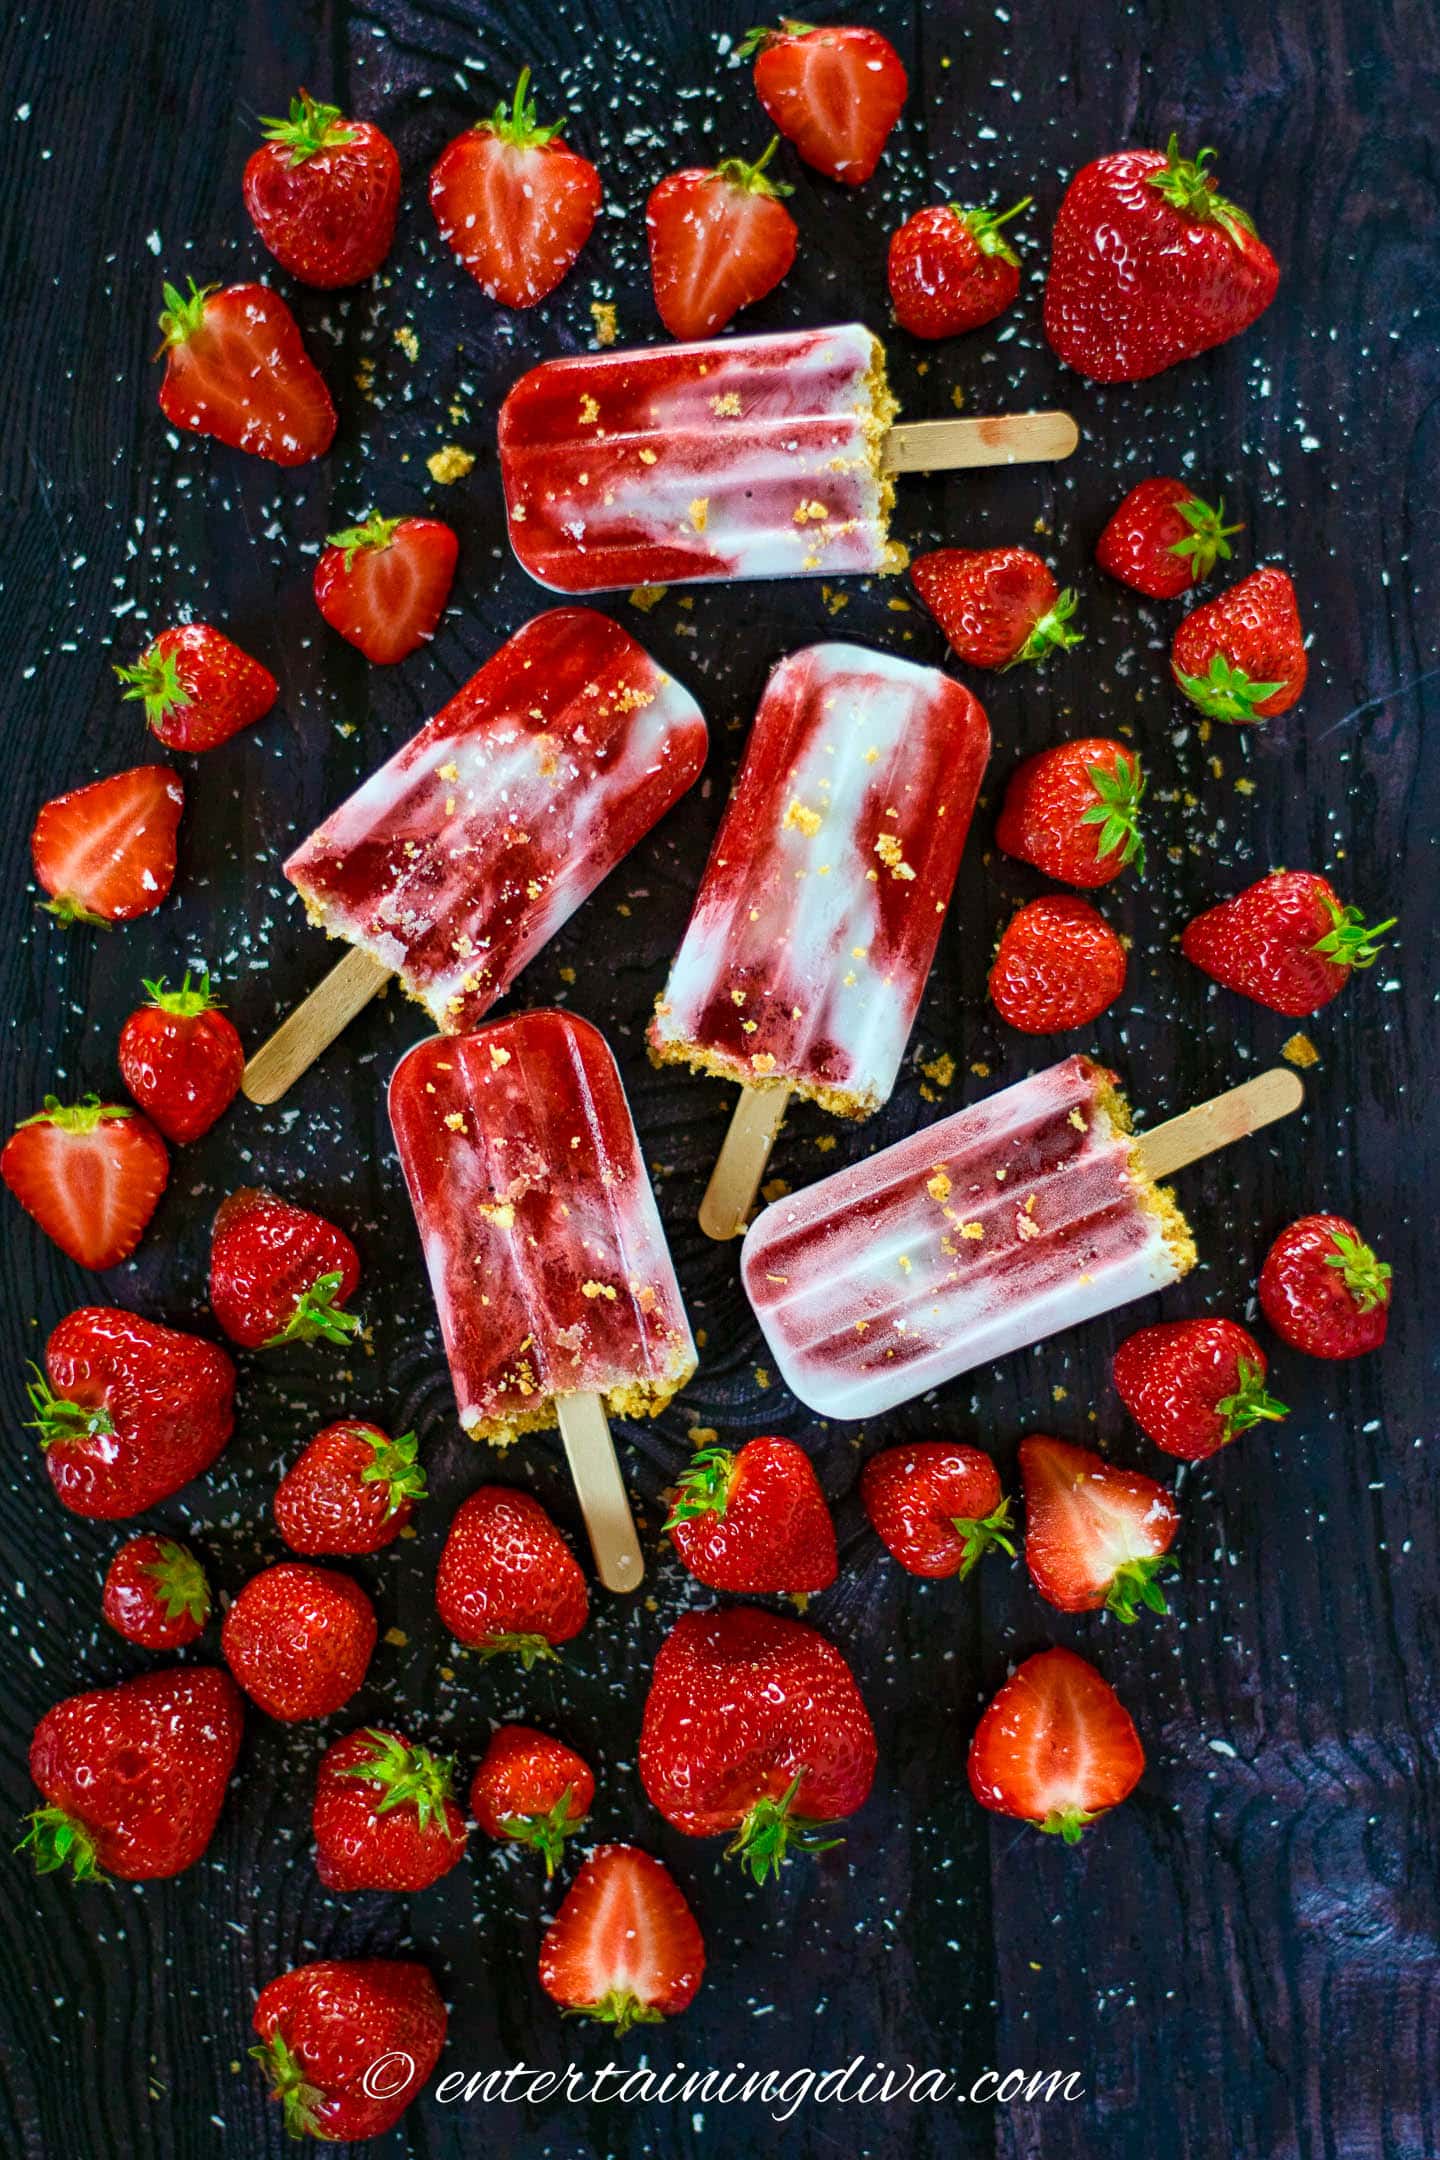 coconut milk and strawberry popsicles on a table surrounded by strawberries